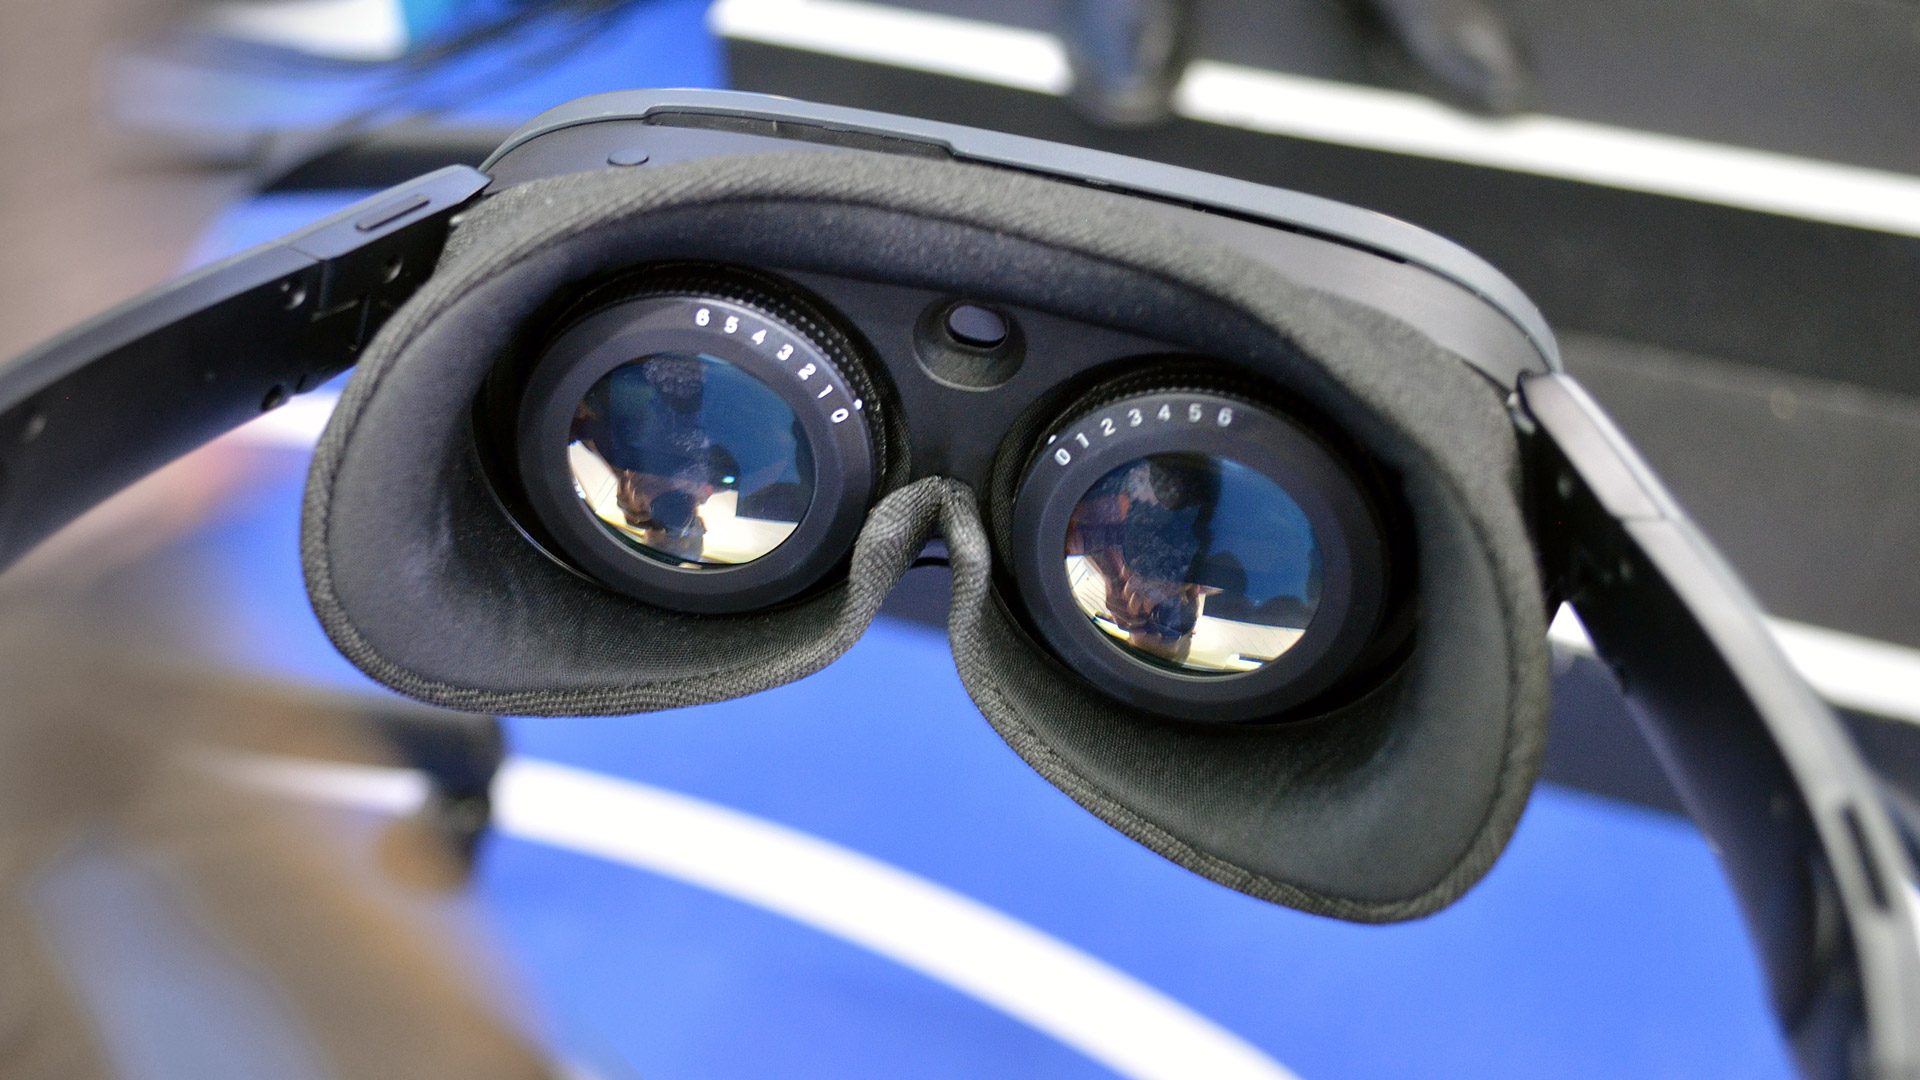 Vive XR Elite Hands-on: Lightweight & Compact, But Shares Quest